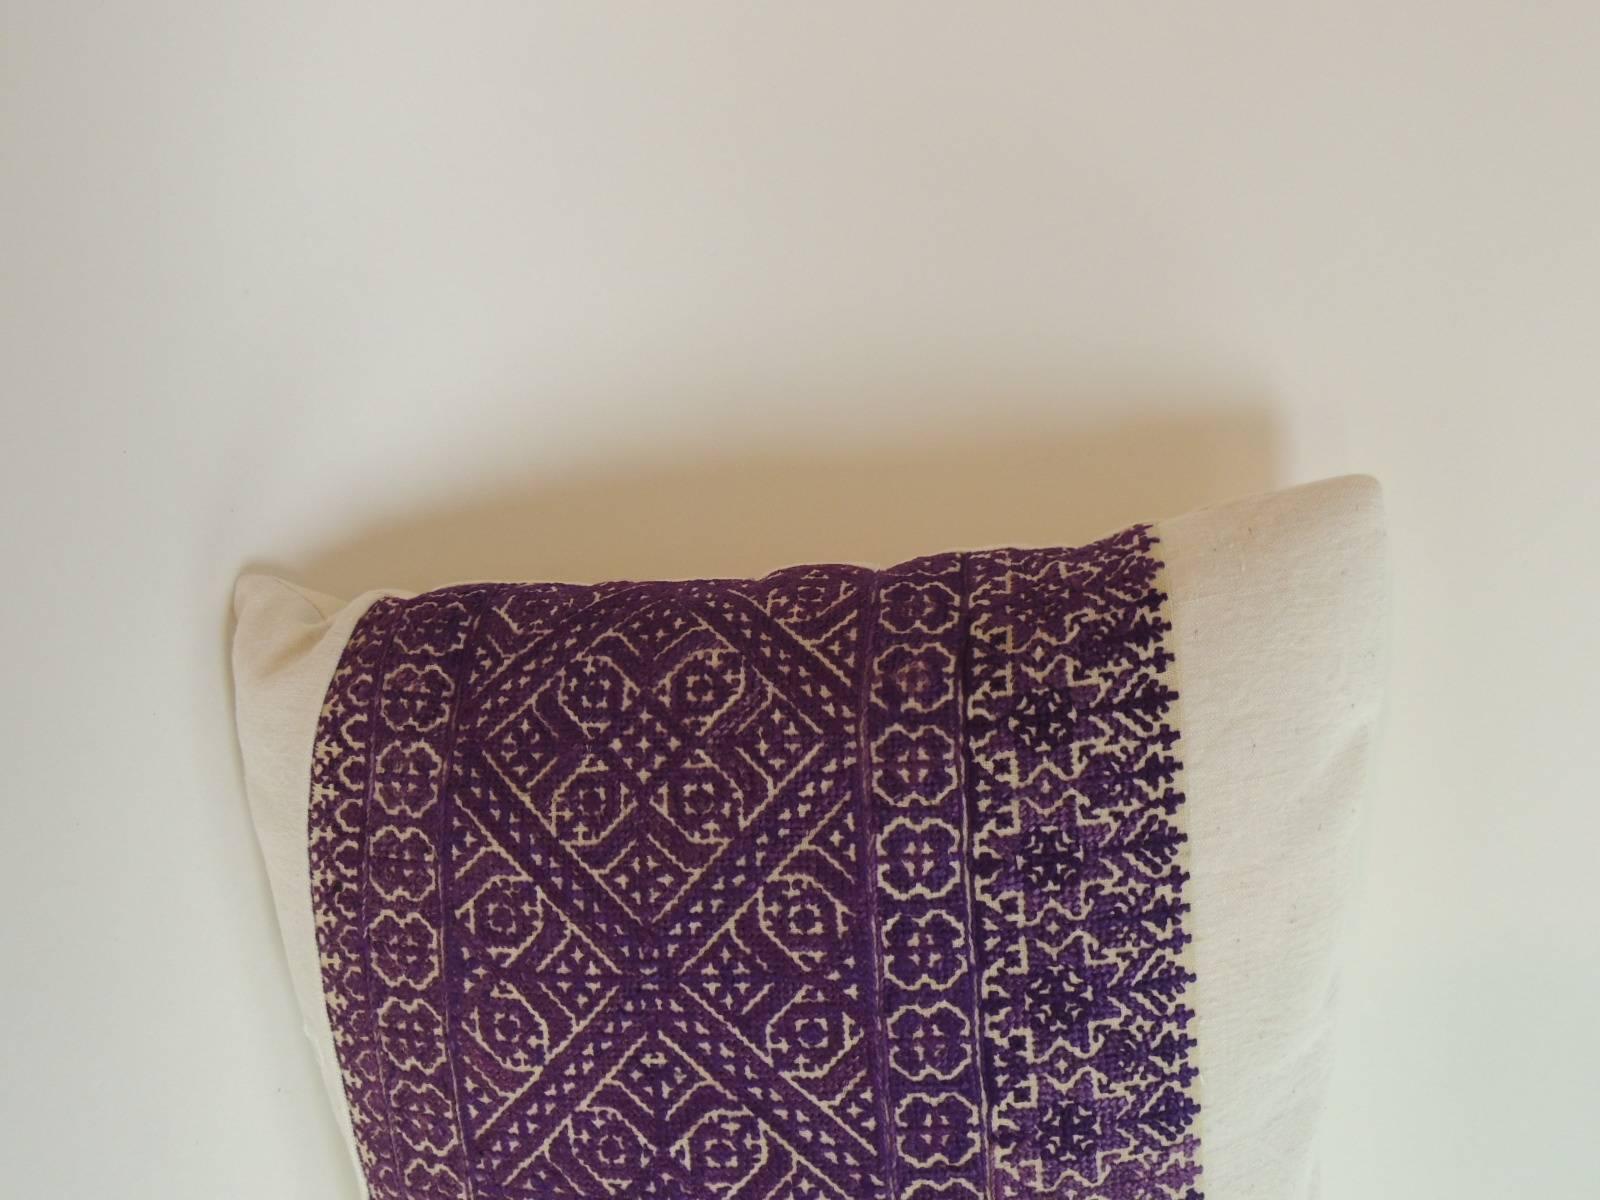 Purple and natural Fez antique textile embroidered silk threads on linen decorative bolster pillow with natural linen framing bars and natural linen backing. Decorative pillows designed and handcrafted in the USA. Hand-stitched closure (no zipper.)